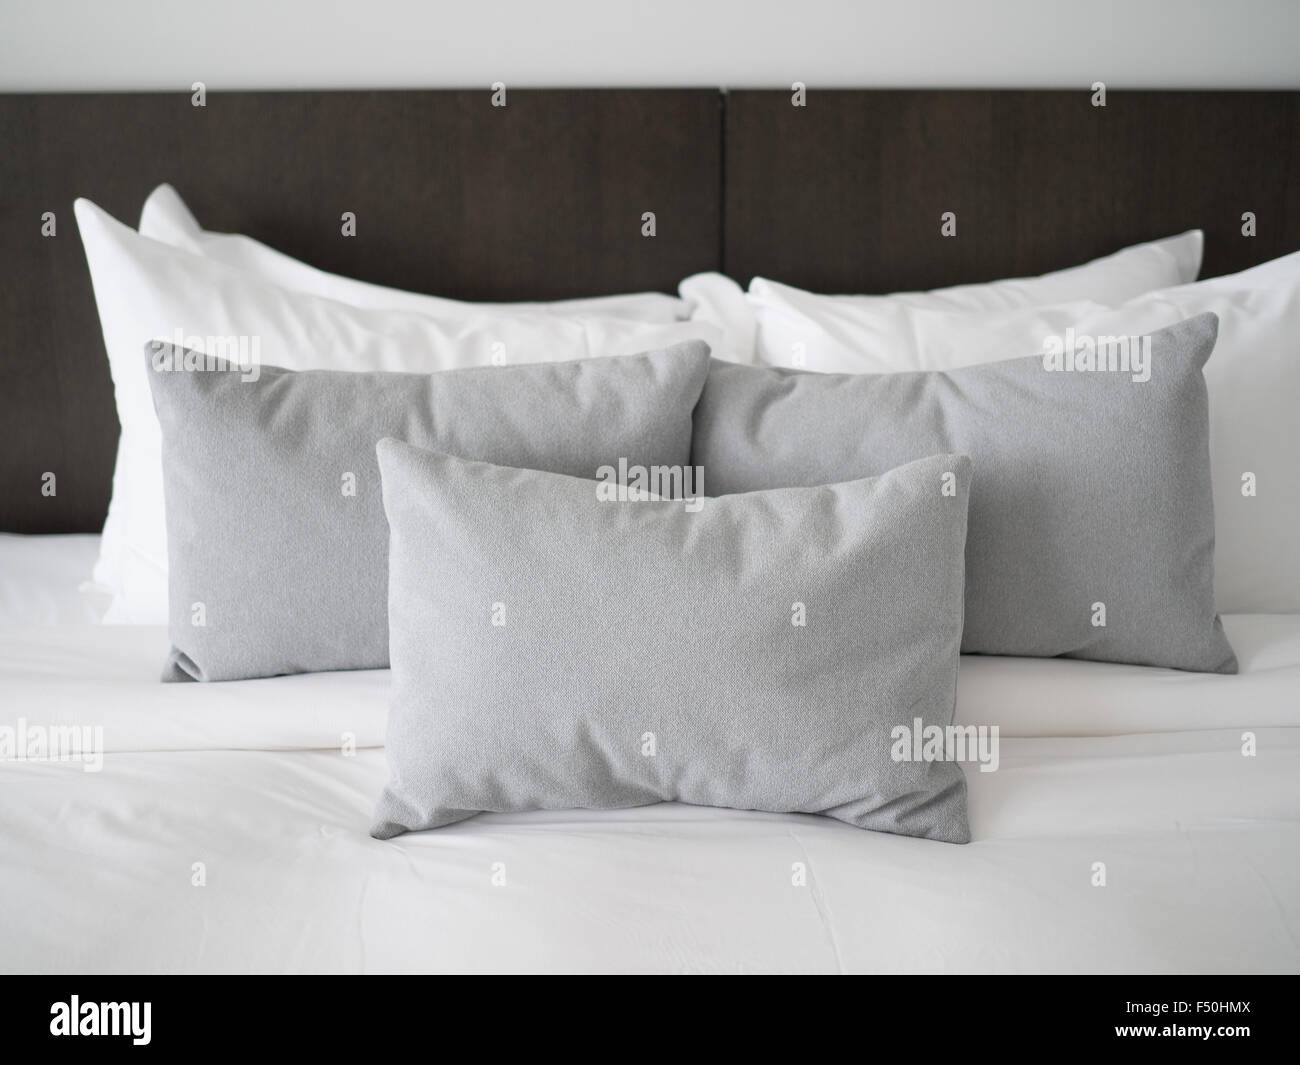 Decorative pillows lined up on a bed Stock Photo